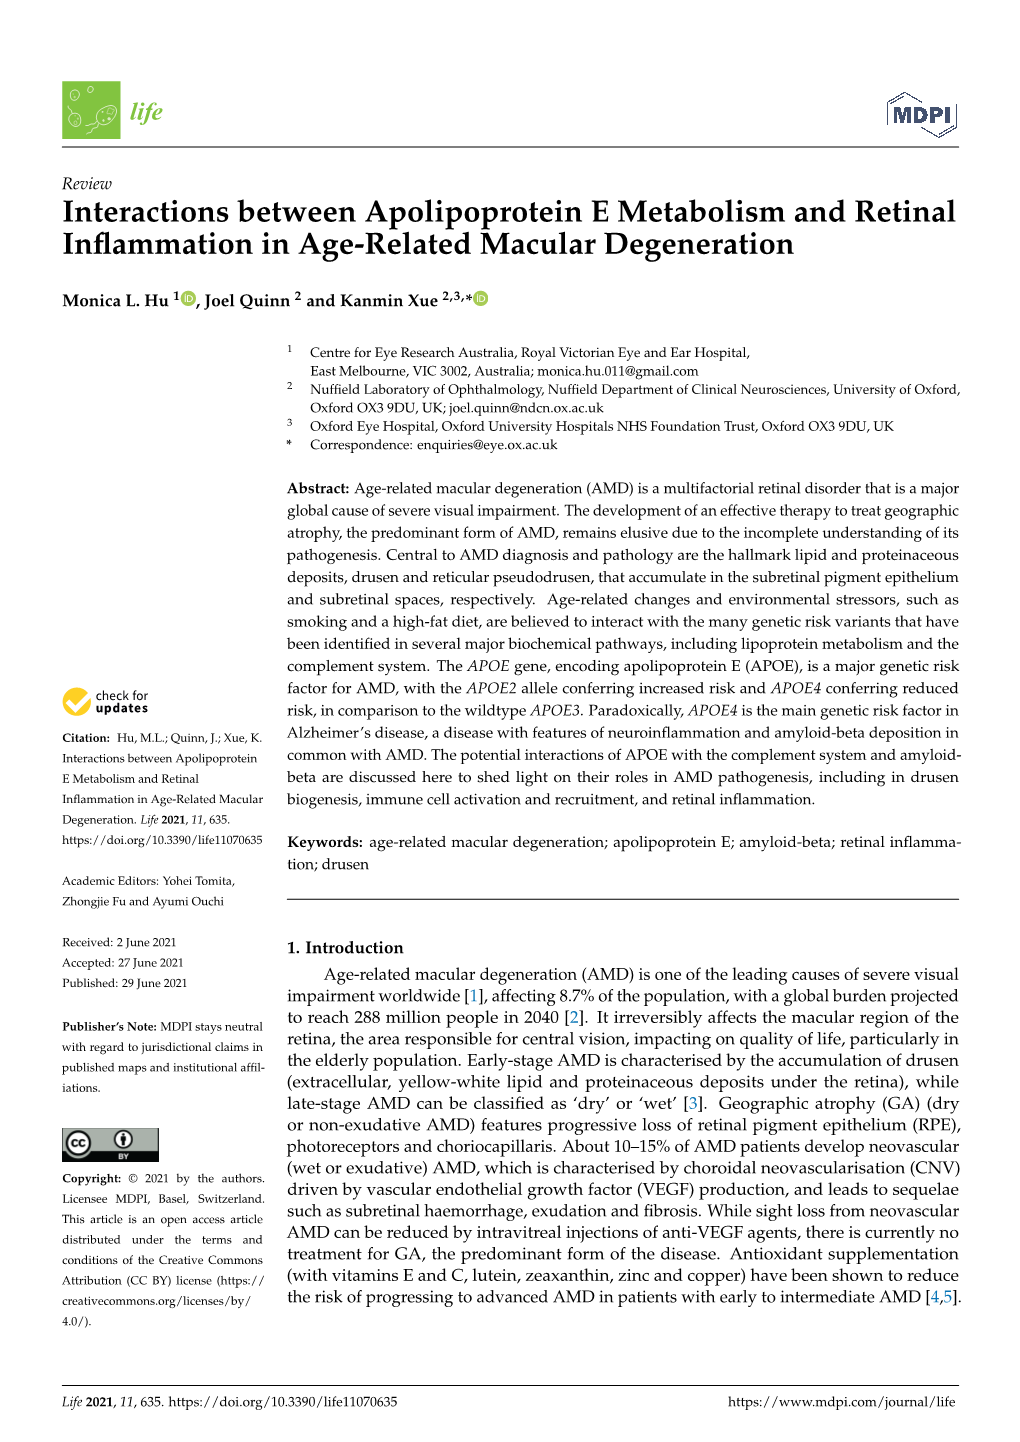 Interactions Between Apolipoprotein E Metabolism and Retinal Inflammation in Age-Related Macular Degeneration